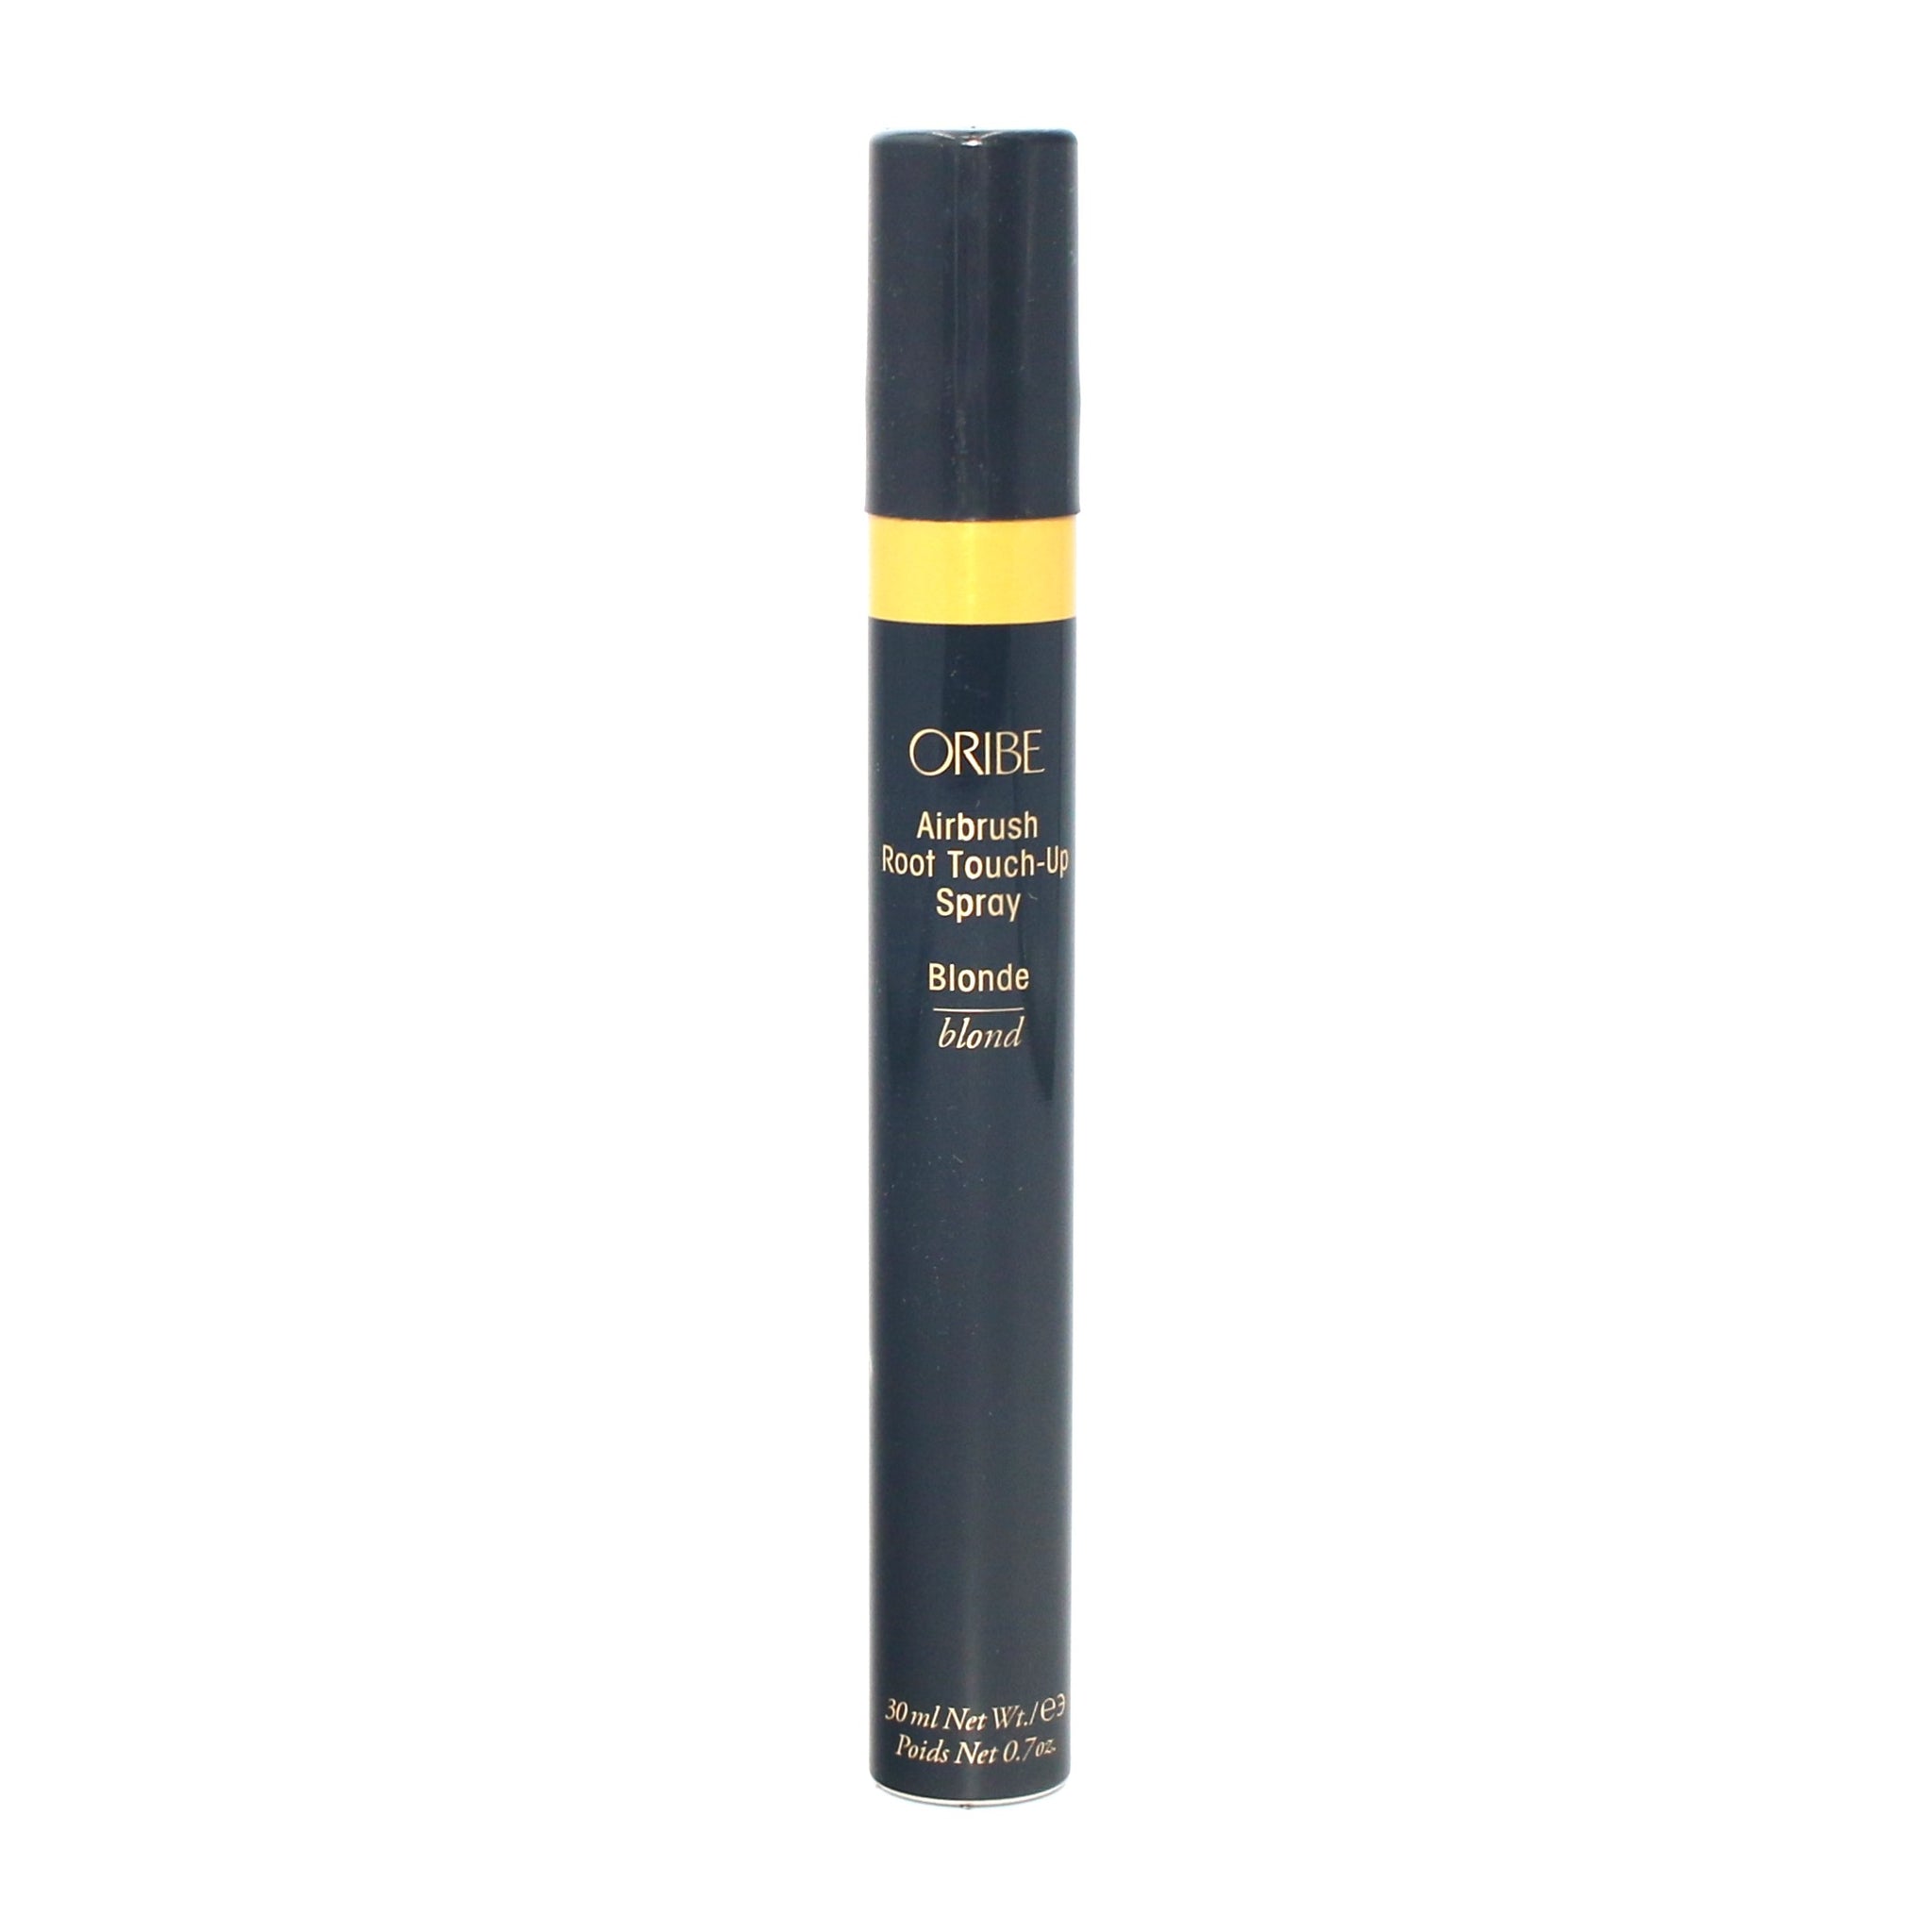 Oribe Airbrush Root Touch Up Spray 0.7 oz (Choose Your Color)